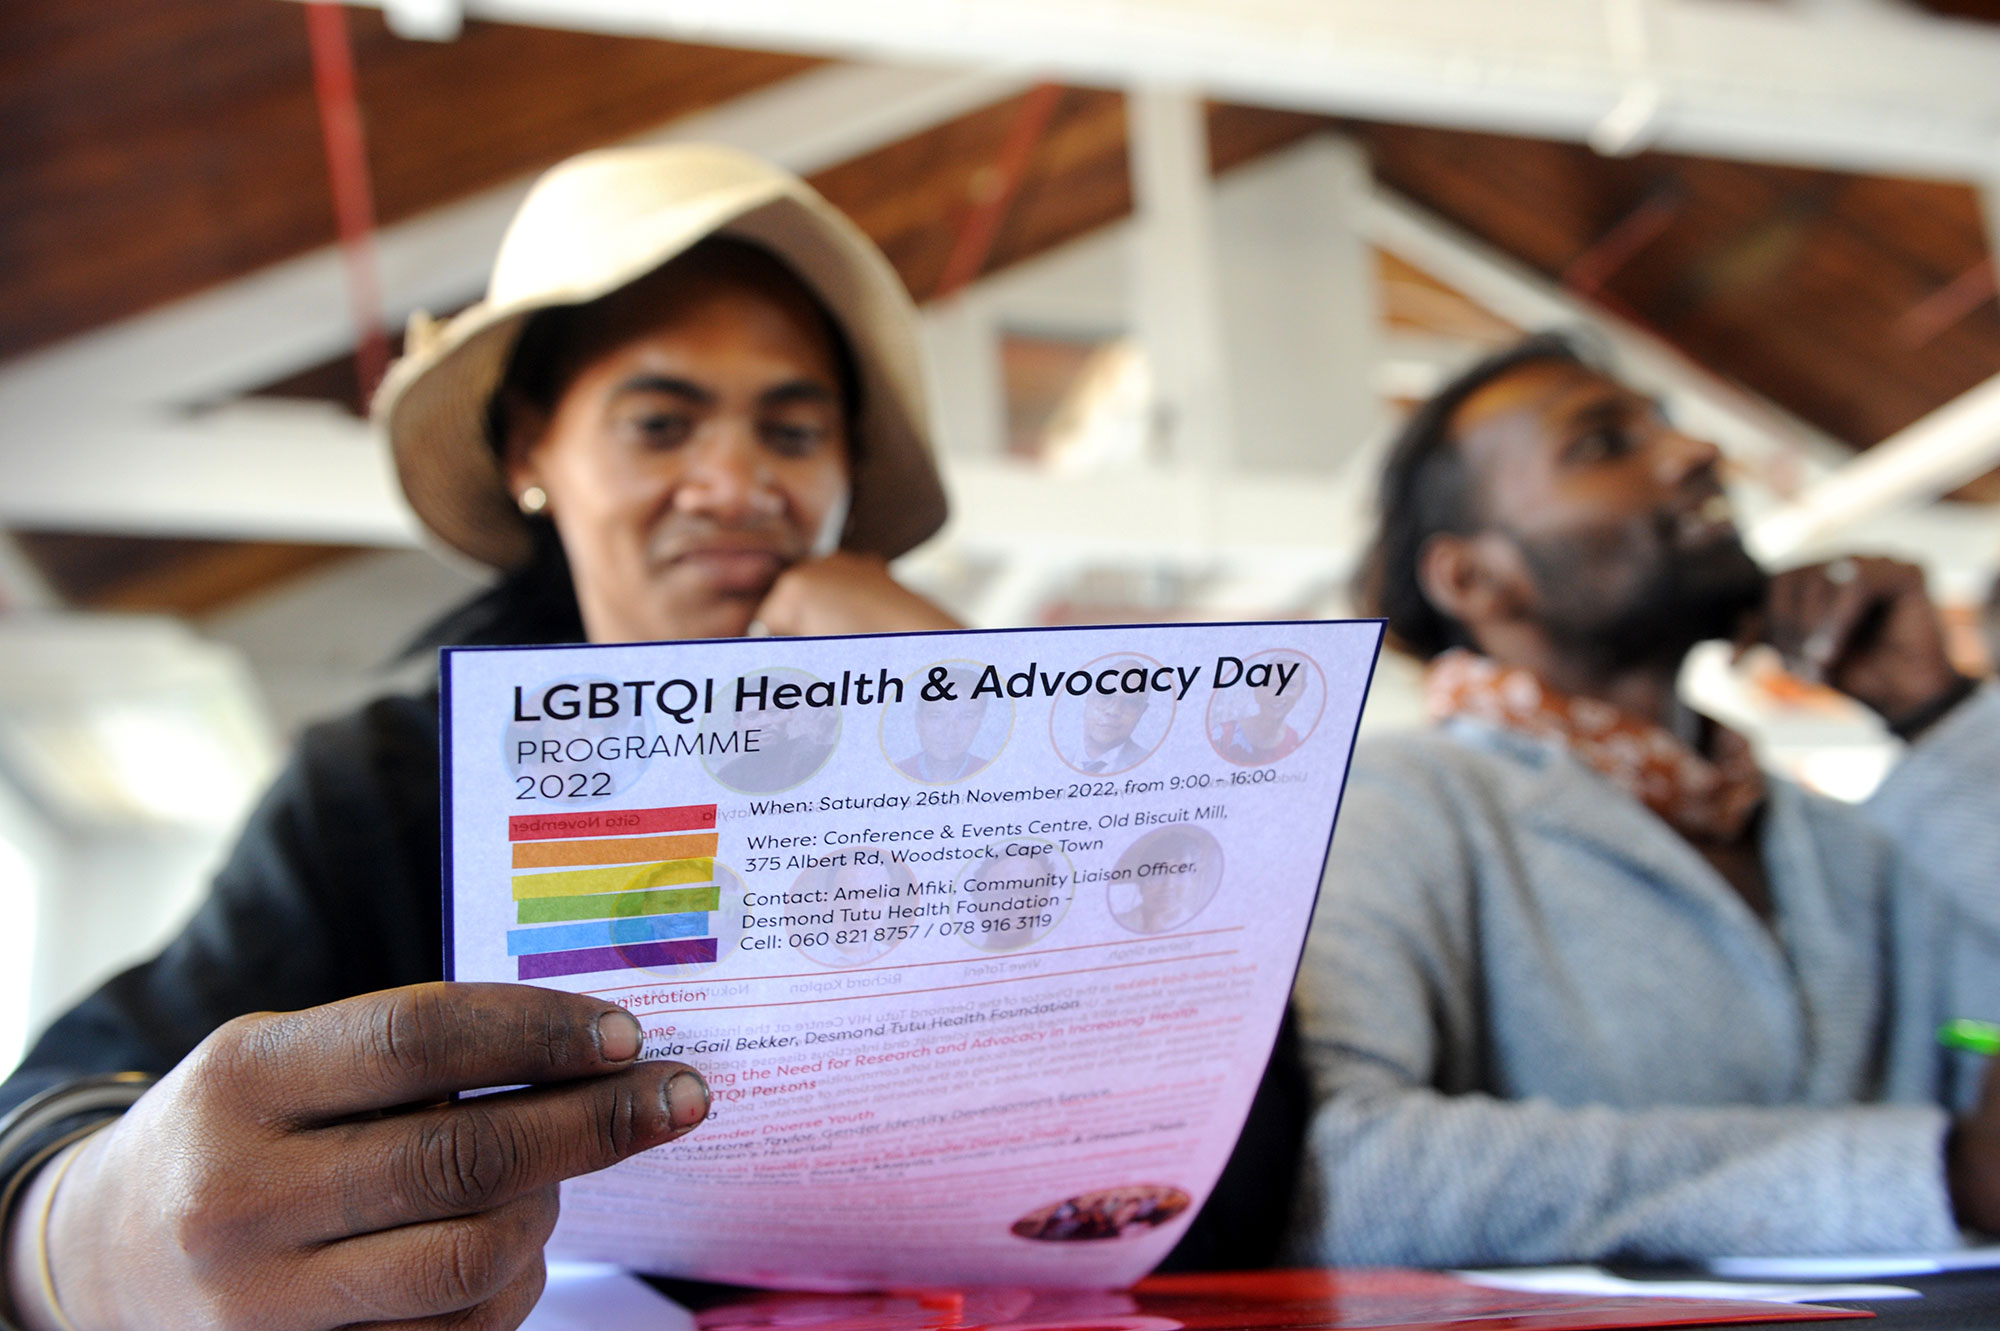 Falling through the cracks: How SA’s healthcare system is failing the LGBTQI community